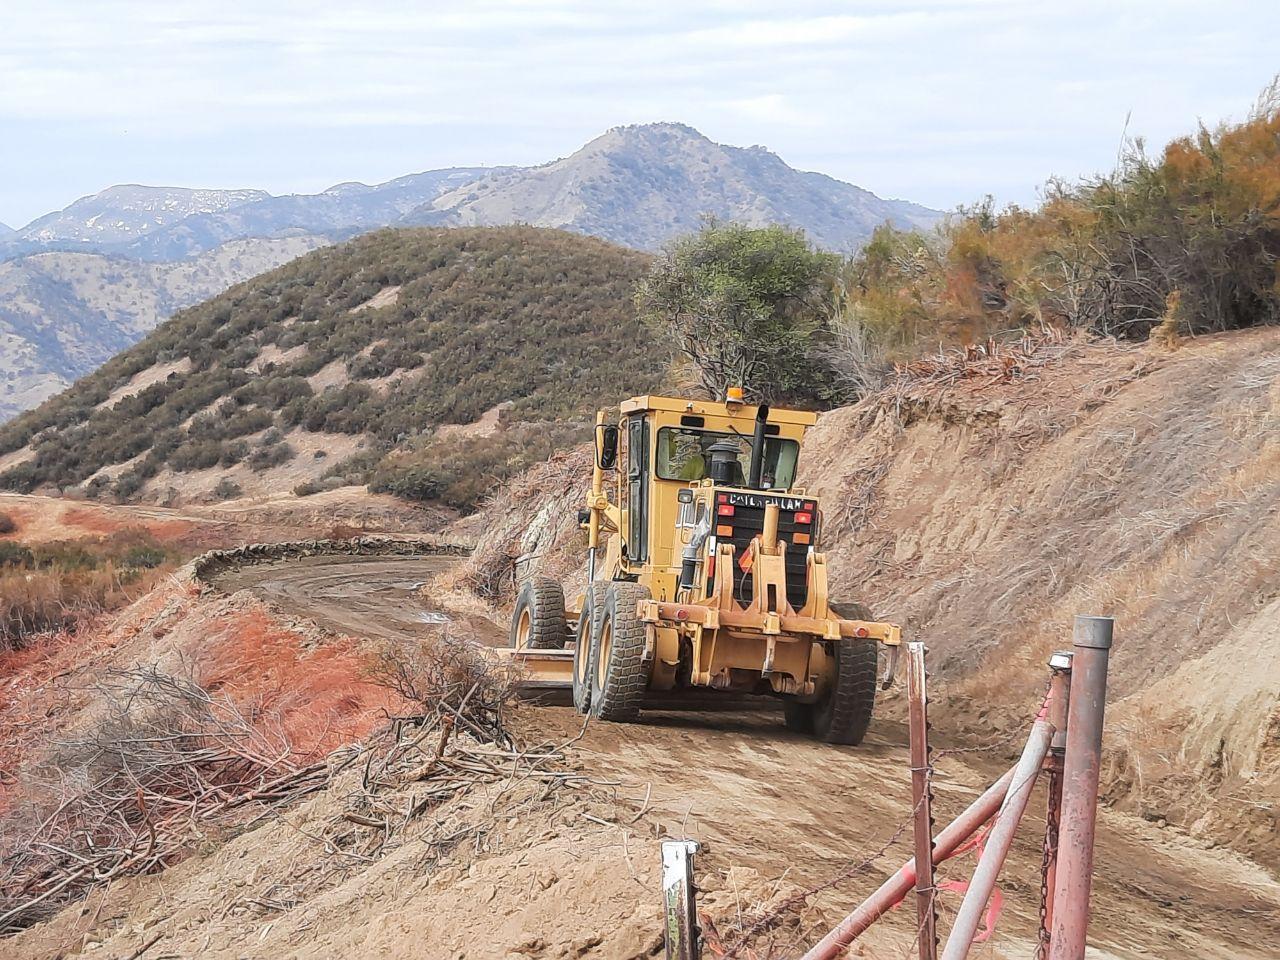 A road grader, piece of heavy equipment, working on dirt road to maintain safe passage for firefighting resources.